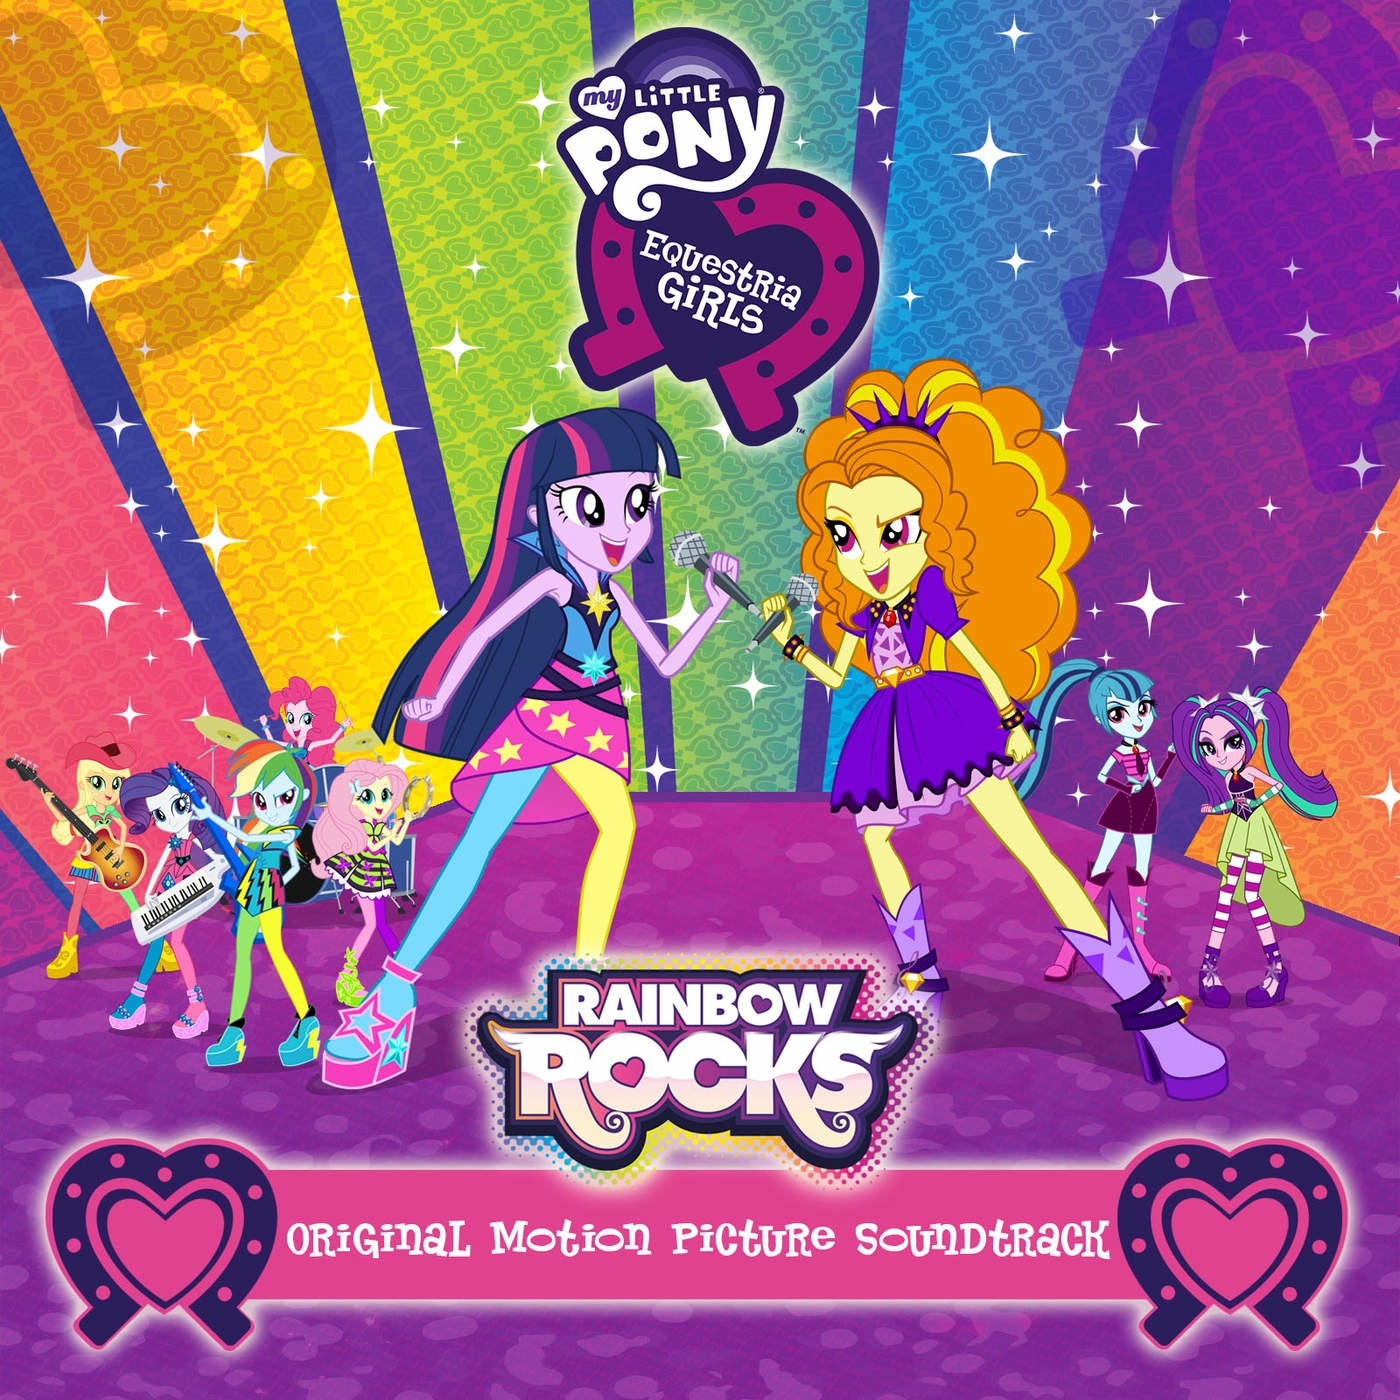 My Little Pony Equestria Girls: Rainbow Rocks Motion Picture Soundtrack. My Little Pony Friendship is Magic